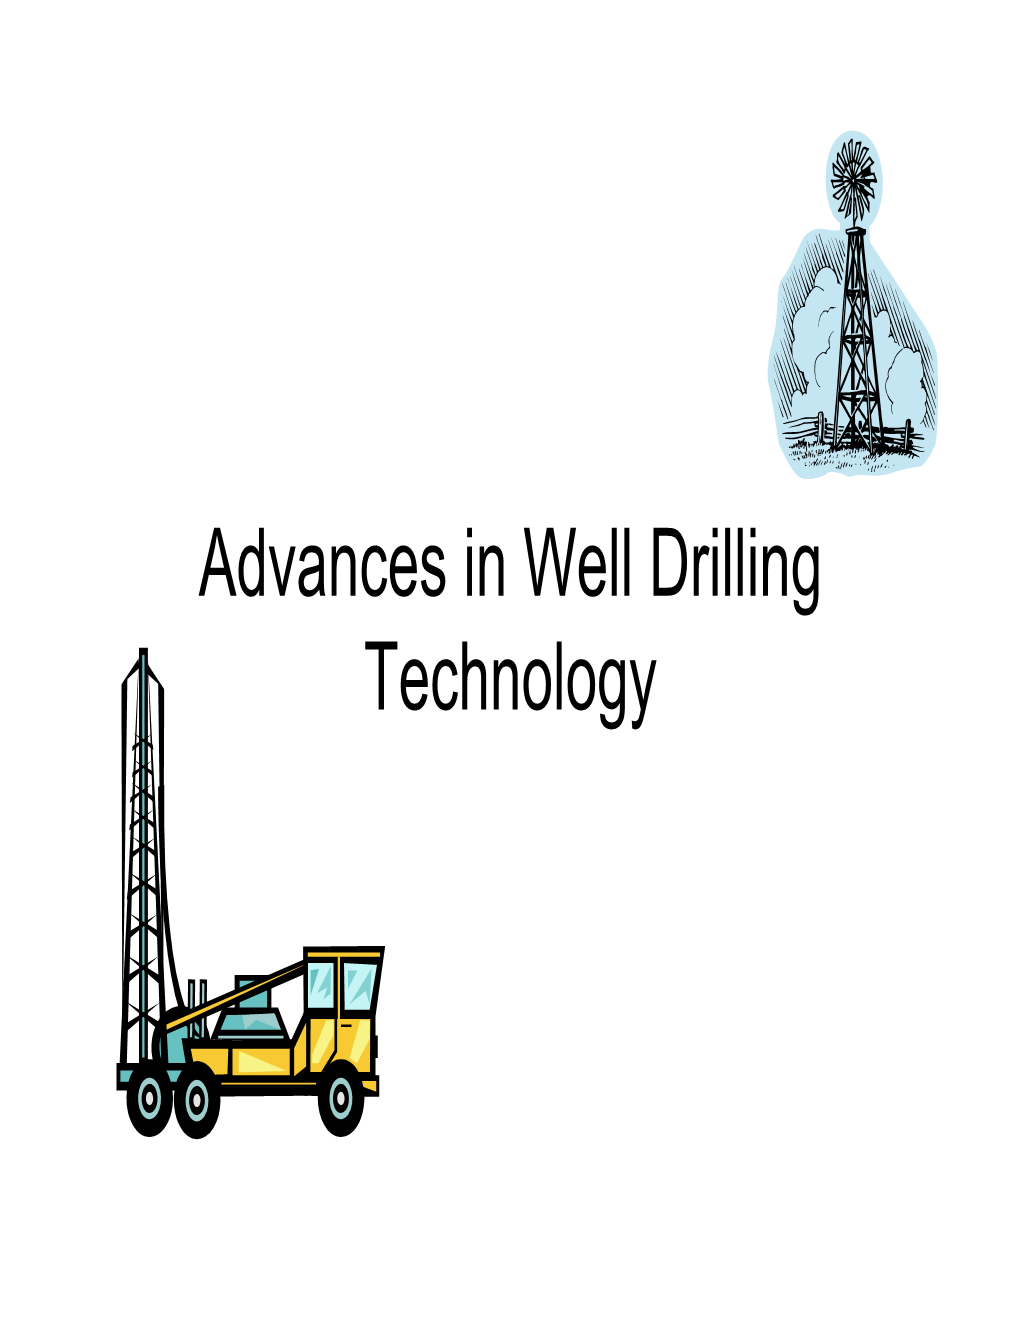 Advances in Well Drilling Technology Earlyearly Wellwell Drillingdrilling • the Earliest Known Drilling Method Was Chinese Bamboo Tools